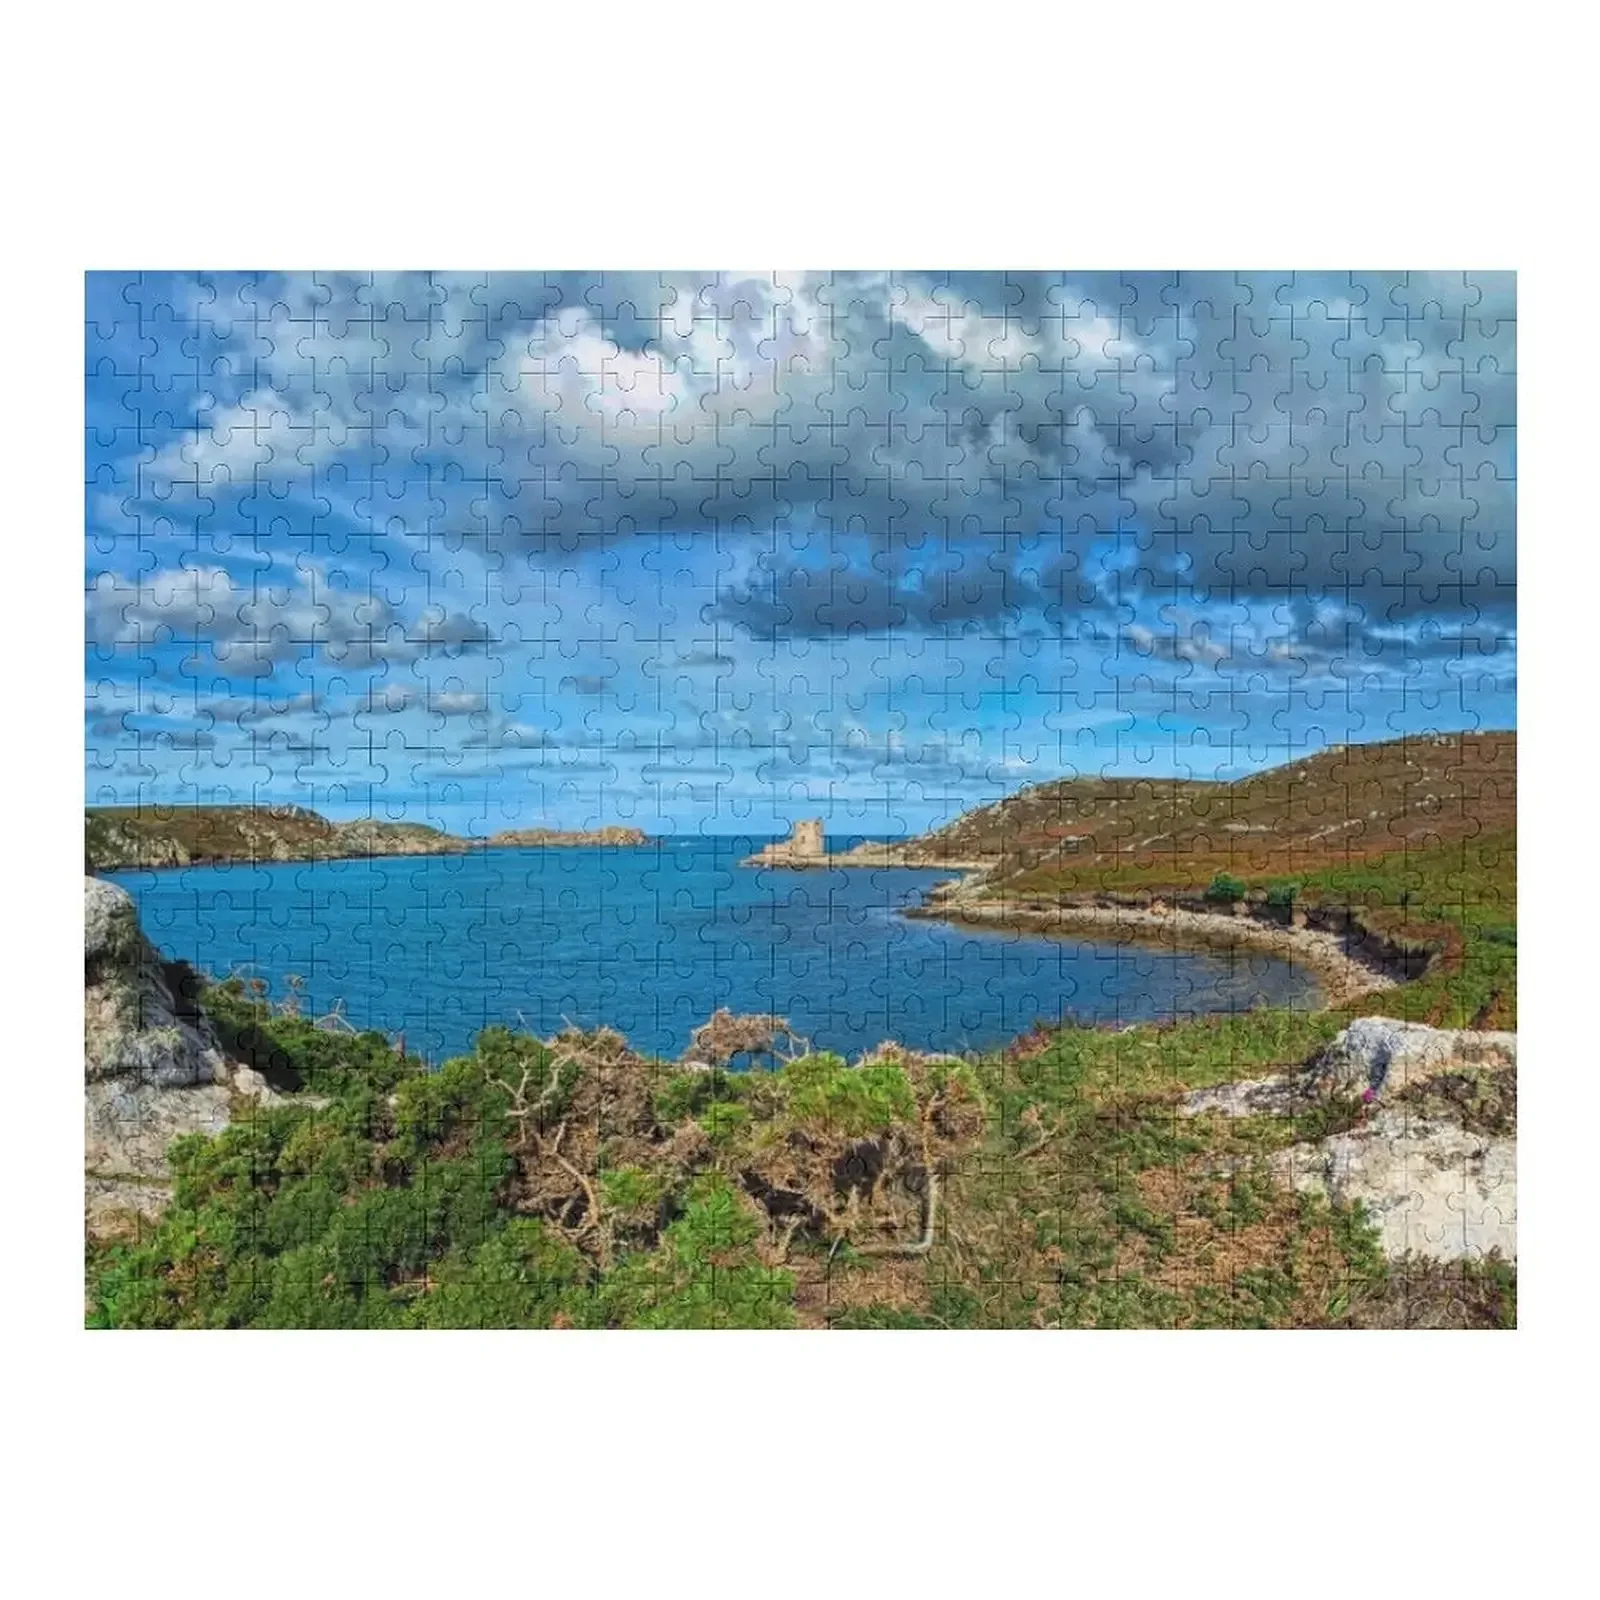 Cromwells Castle Jigsaw Puzzle With Photo Custom Gifts Woodens For Adults Puzzle happiness dunkin donuts sense jigsaw puzzle with photo custom gift woodens for adults puzzle